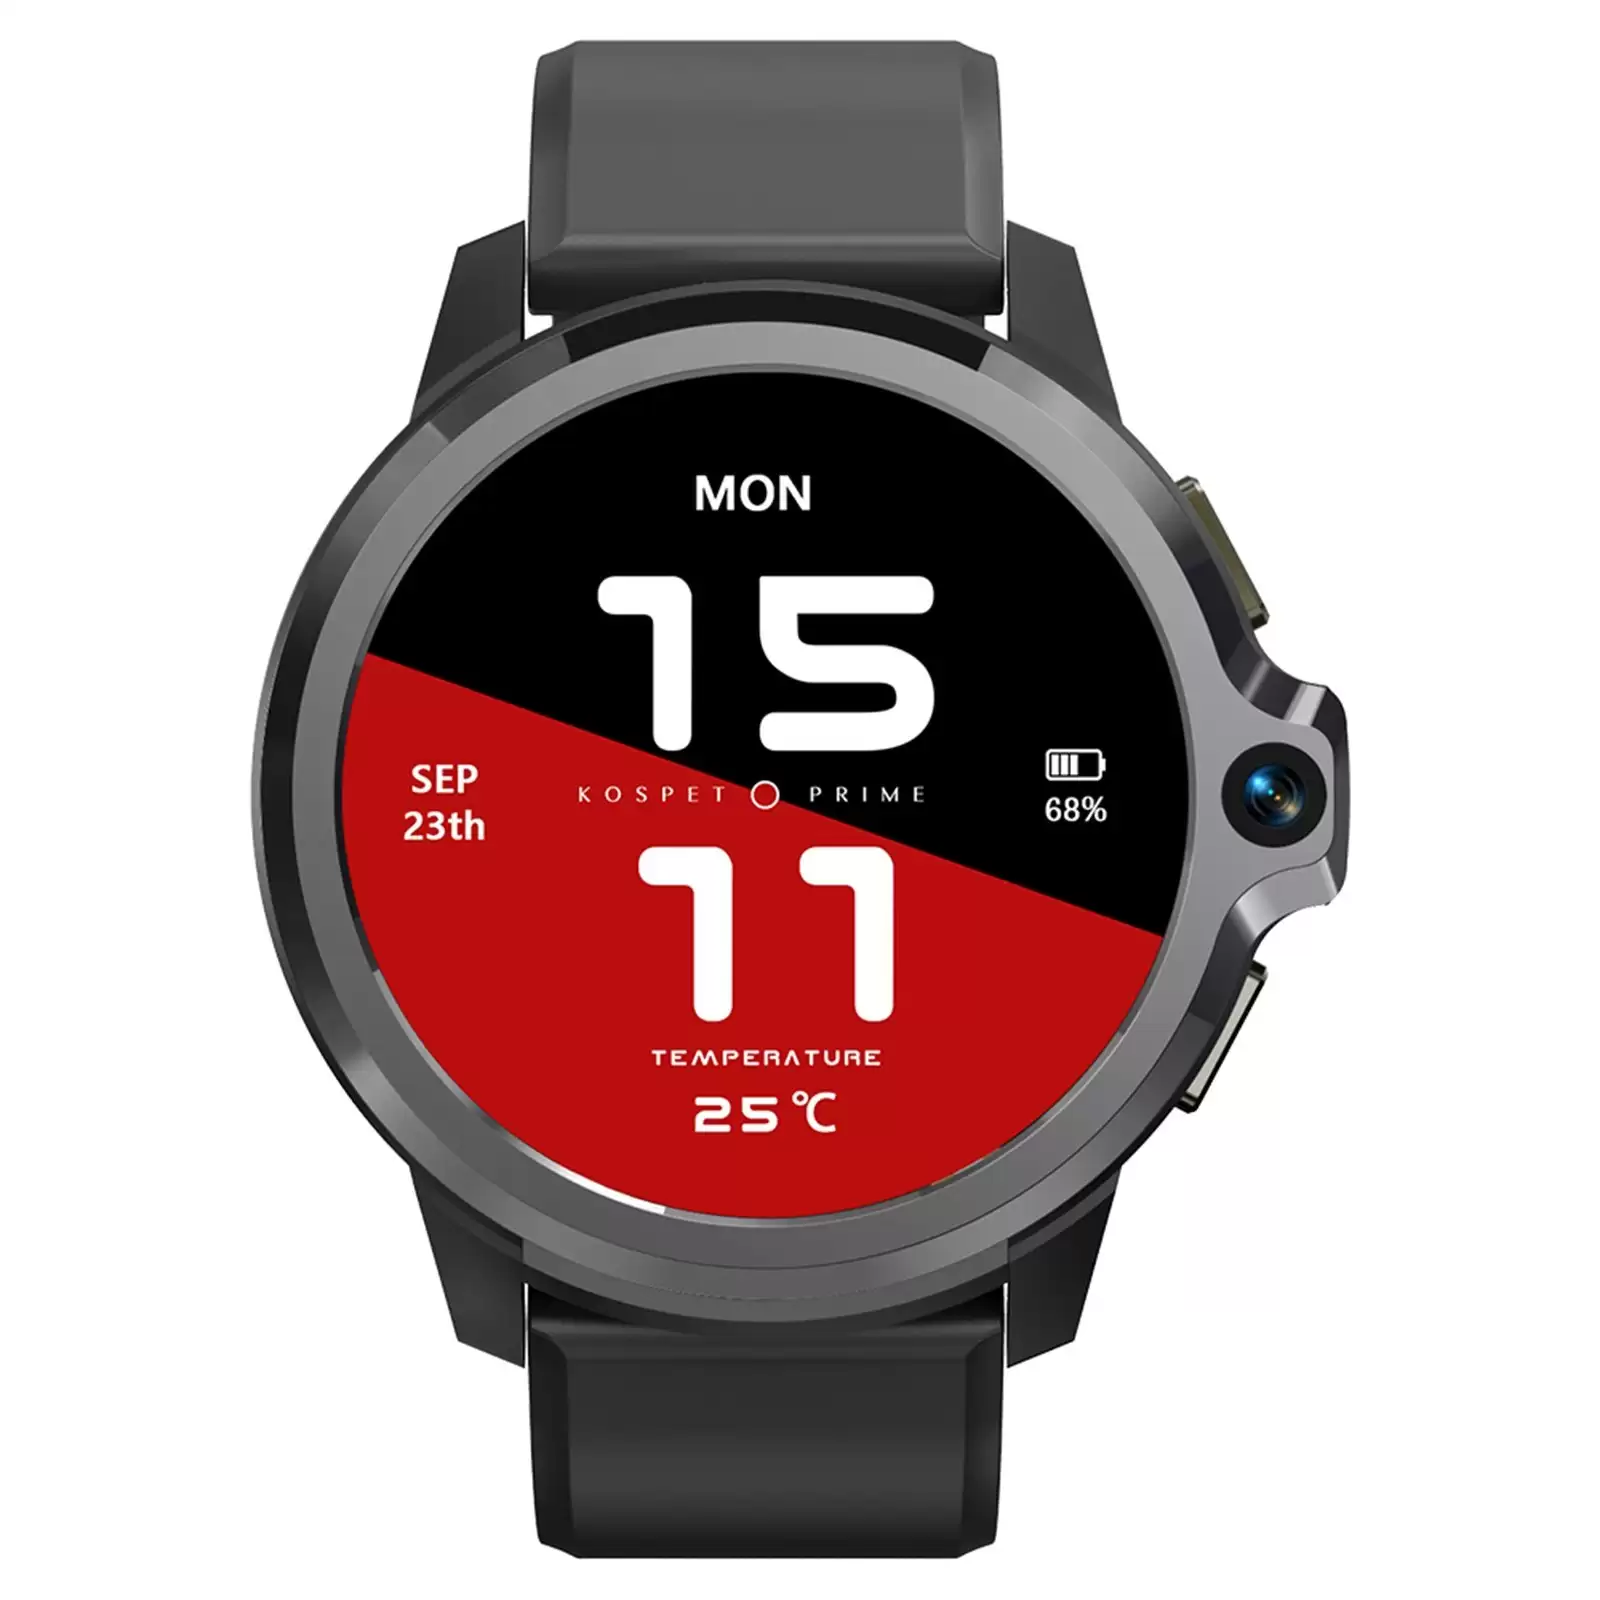 Get Extra 52% Discount On Kospet Prime S 1.6-inch Ips Full-touch Screen Smart Sports Watch, Free Shipping $109.99 At Tomtop